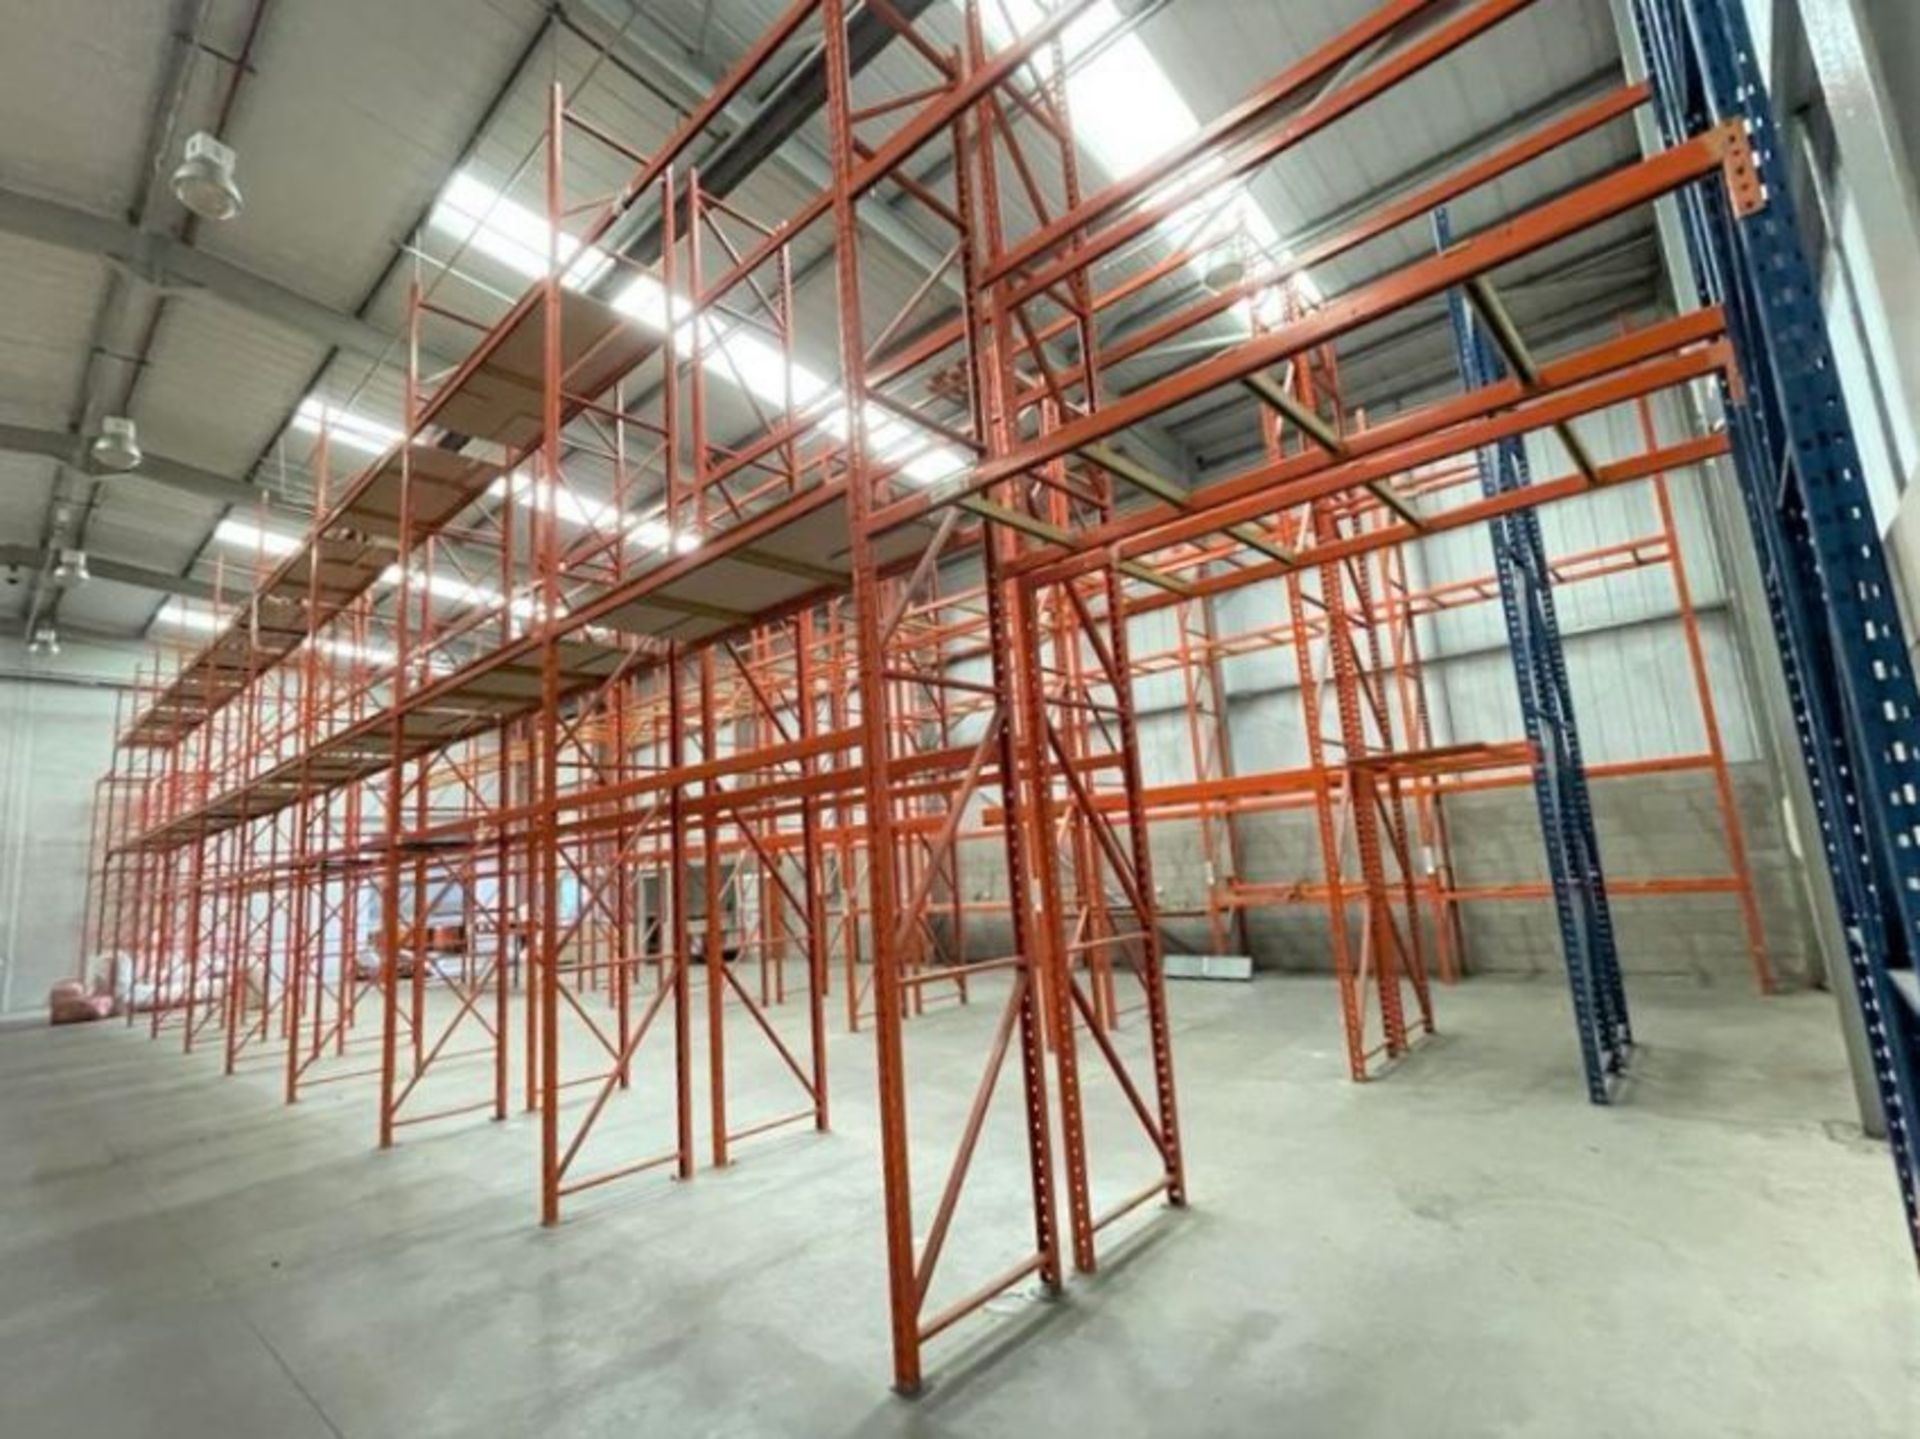 3 x Bays of RediRack Warehouse PALLET RACKING - Lot Includes 4 x Uprights and 18 x Crossbeams - - Image 3 of 5